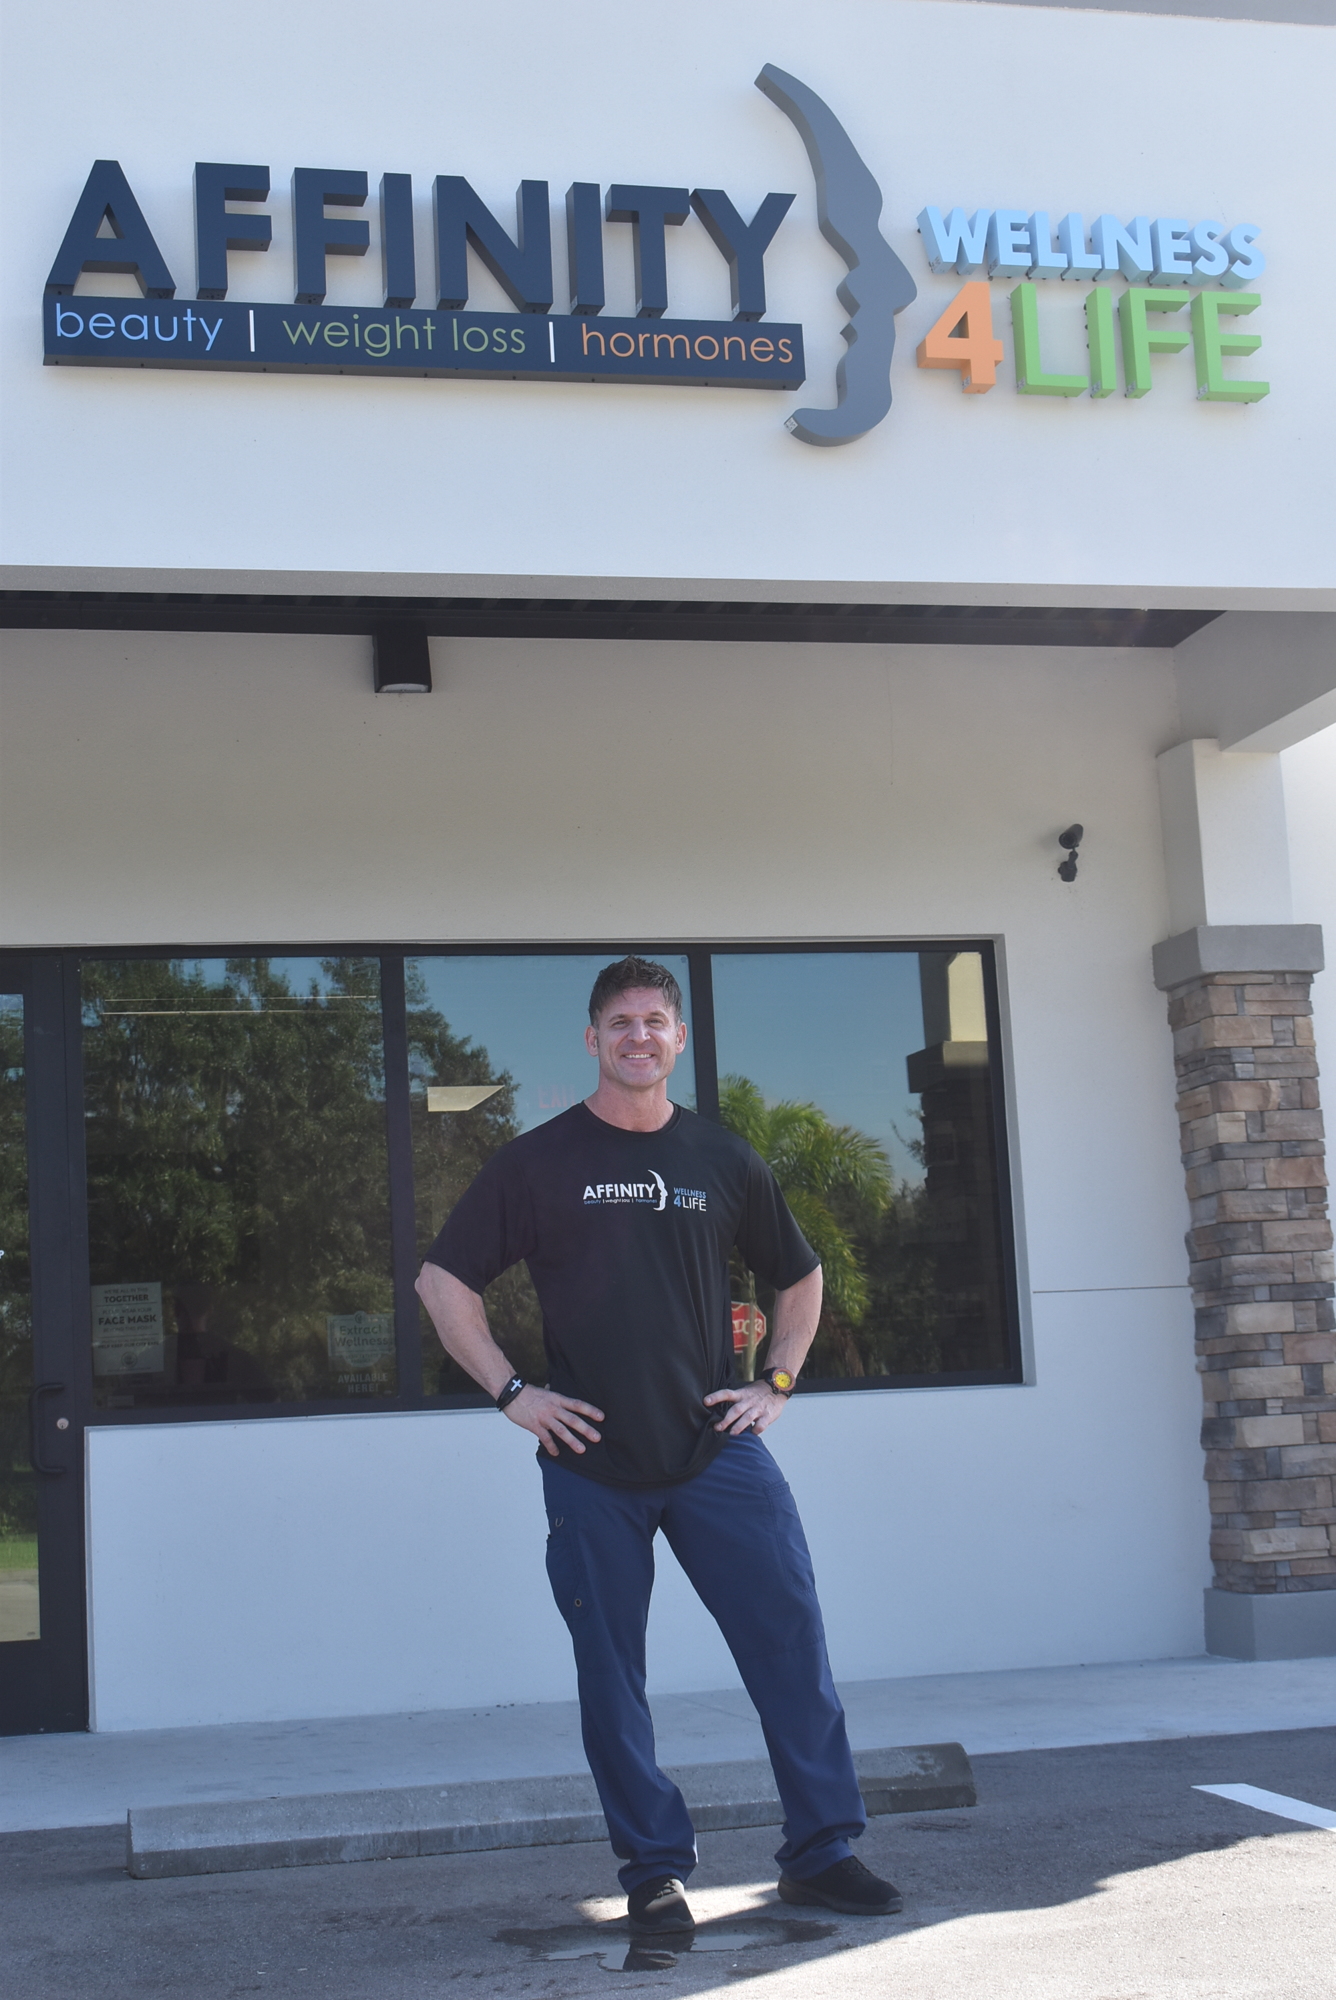 Affinity Wellness 4 Life owner Dominic Louis Sorrentino is a physician assistant with experience in fields from the emergency room to personal training to bodybuilding.